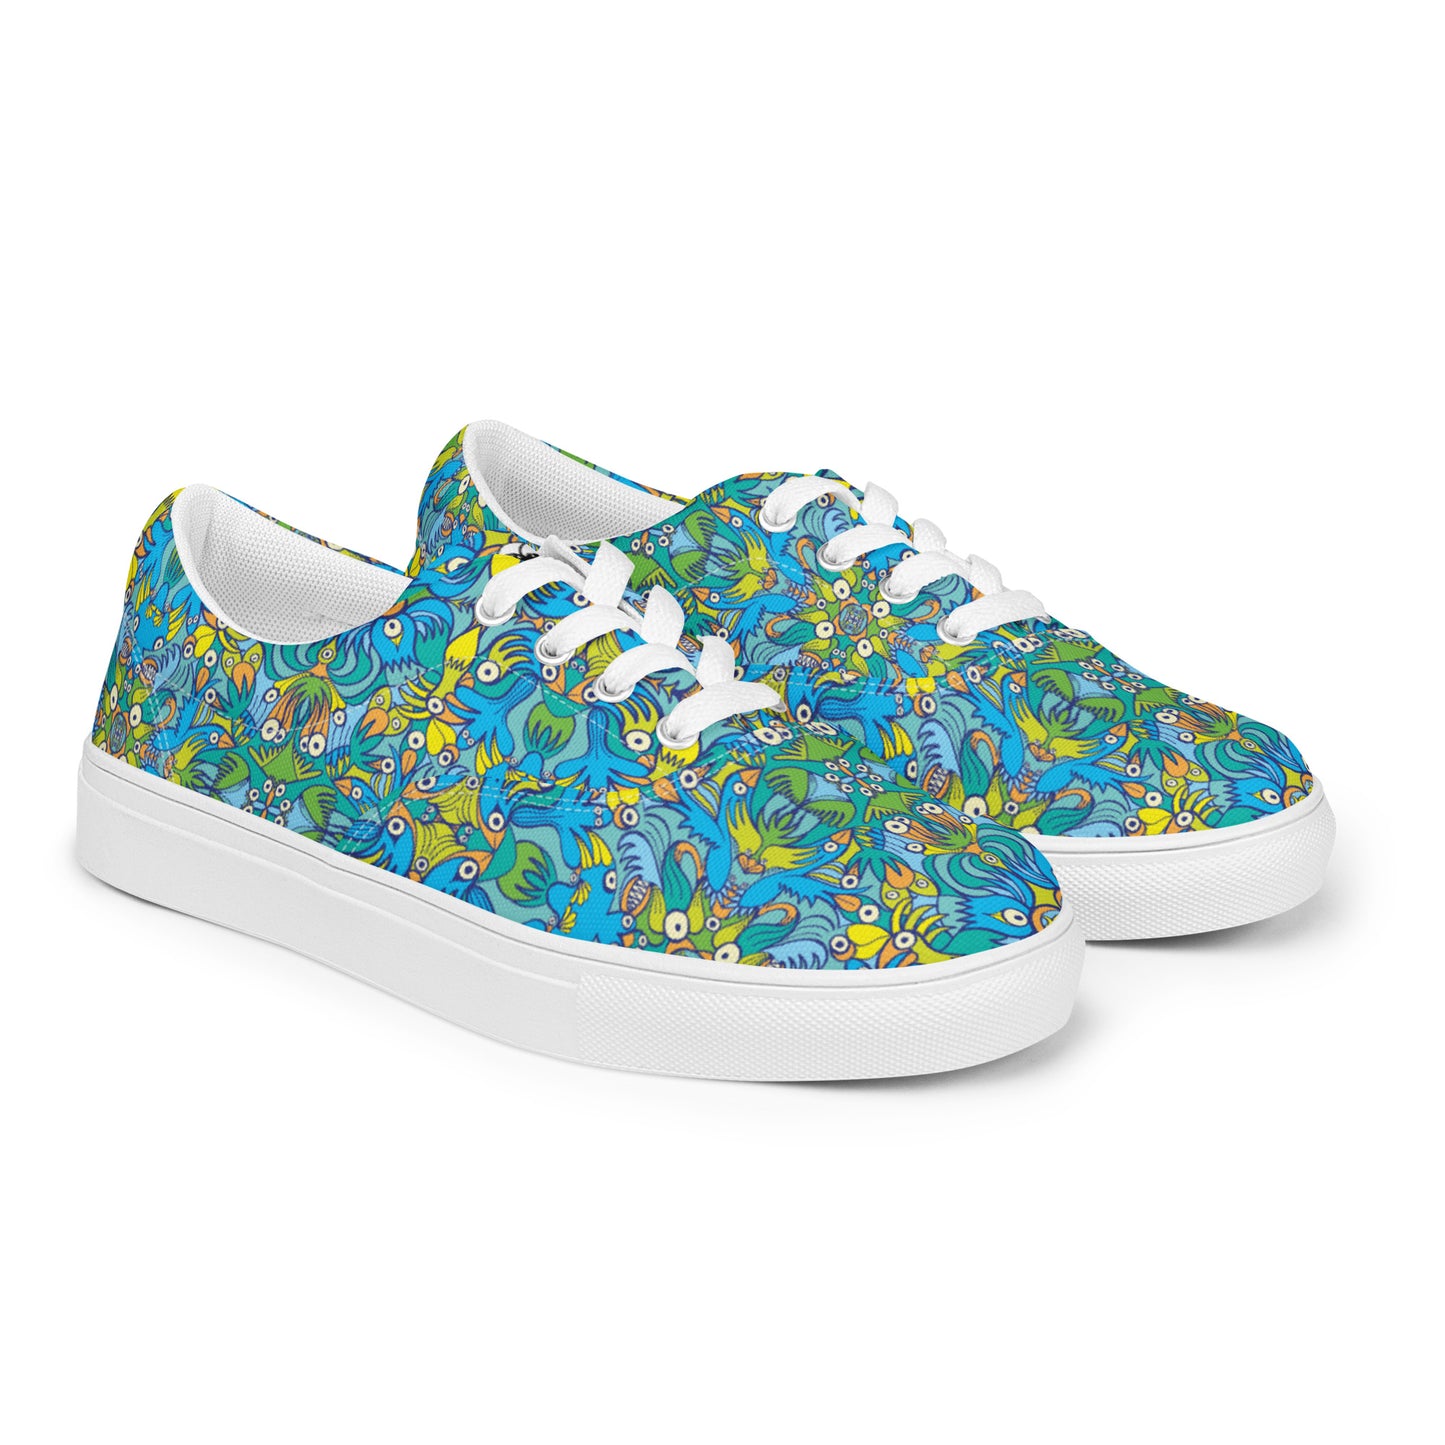 Exotic birds tropical pattern Women’s lace-up canvas shoes. Overview